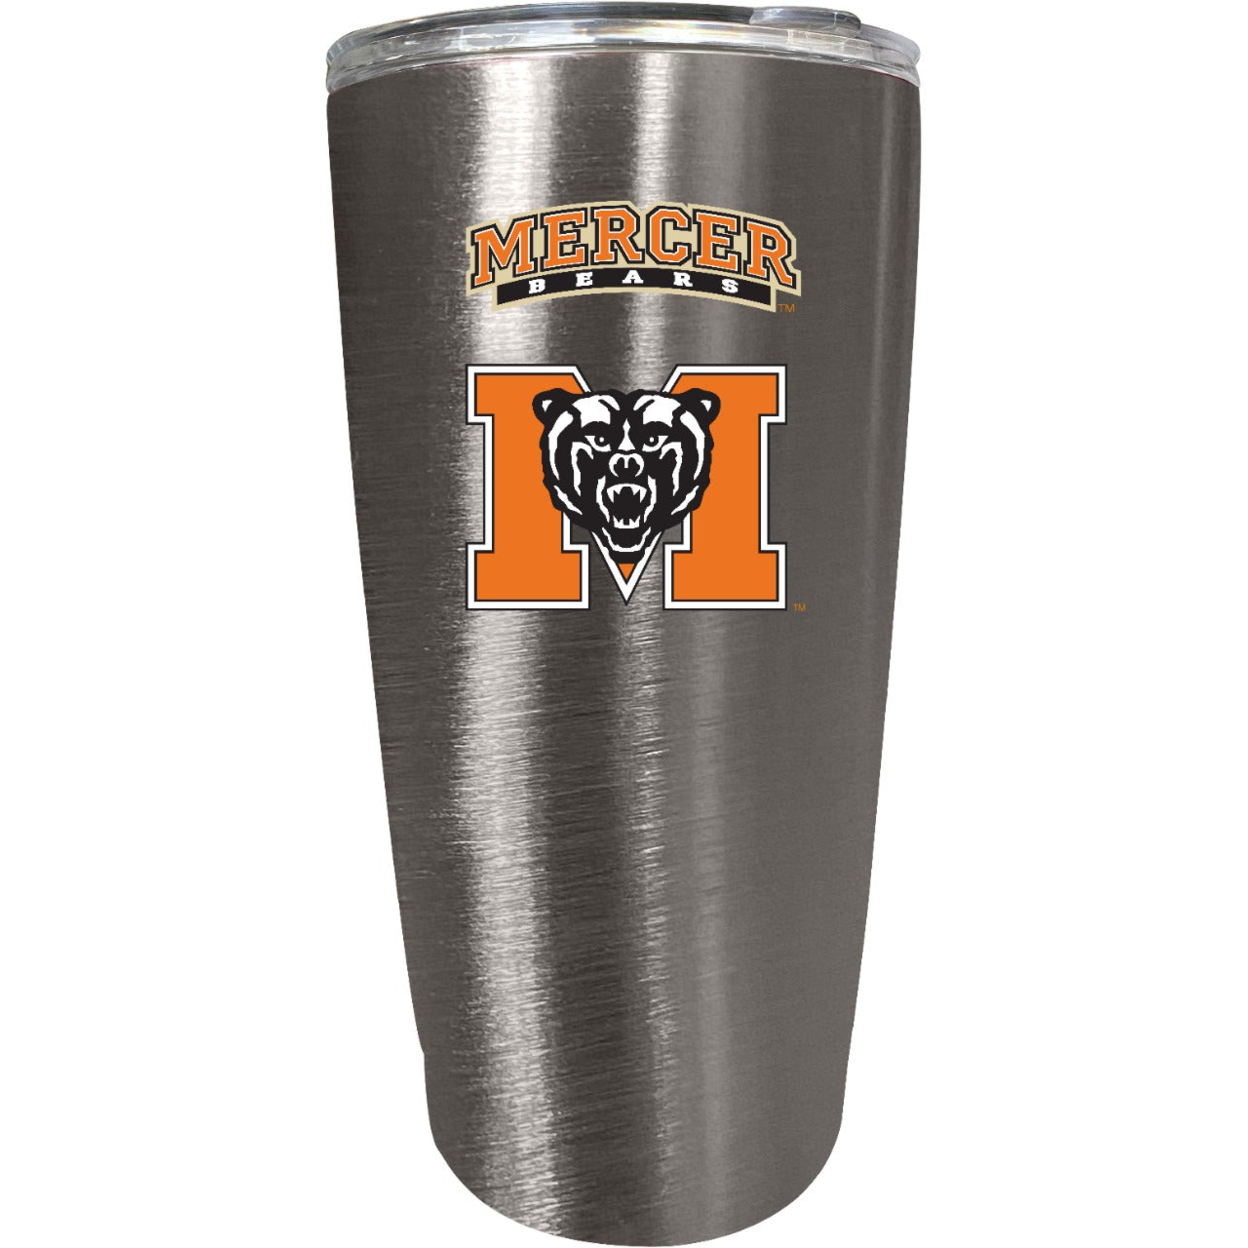 Mercer University 16 Oz Insulated Stainless Steel Tumbler Colorless